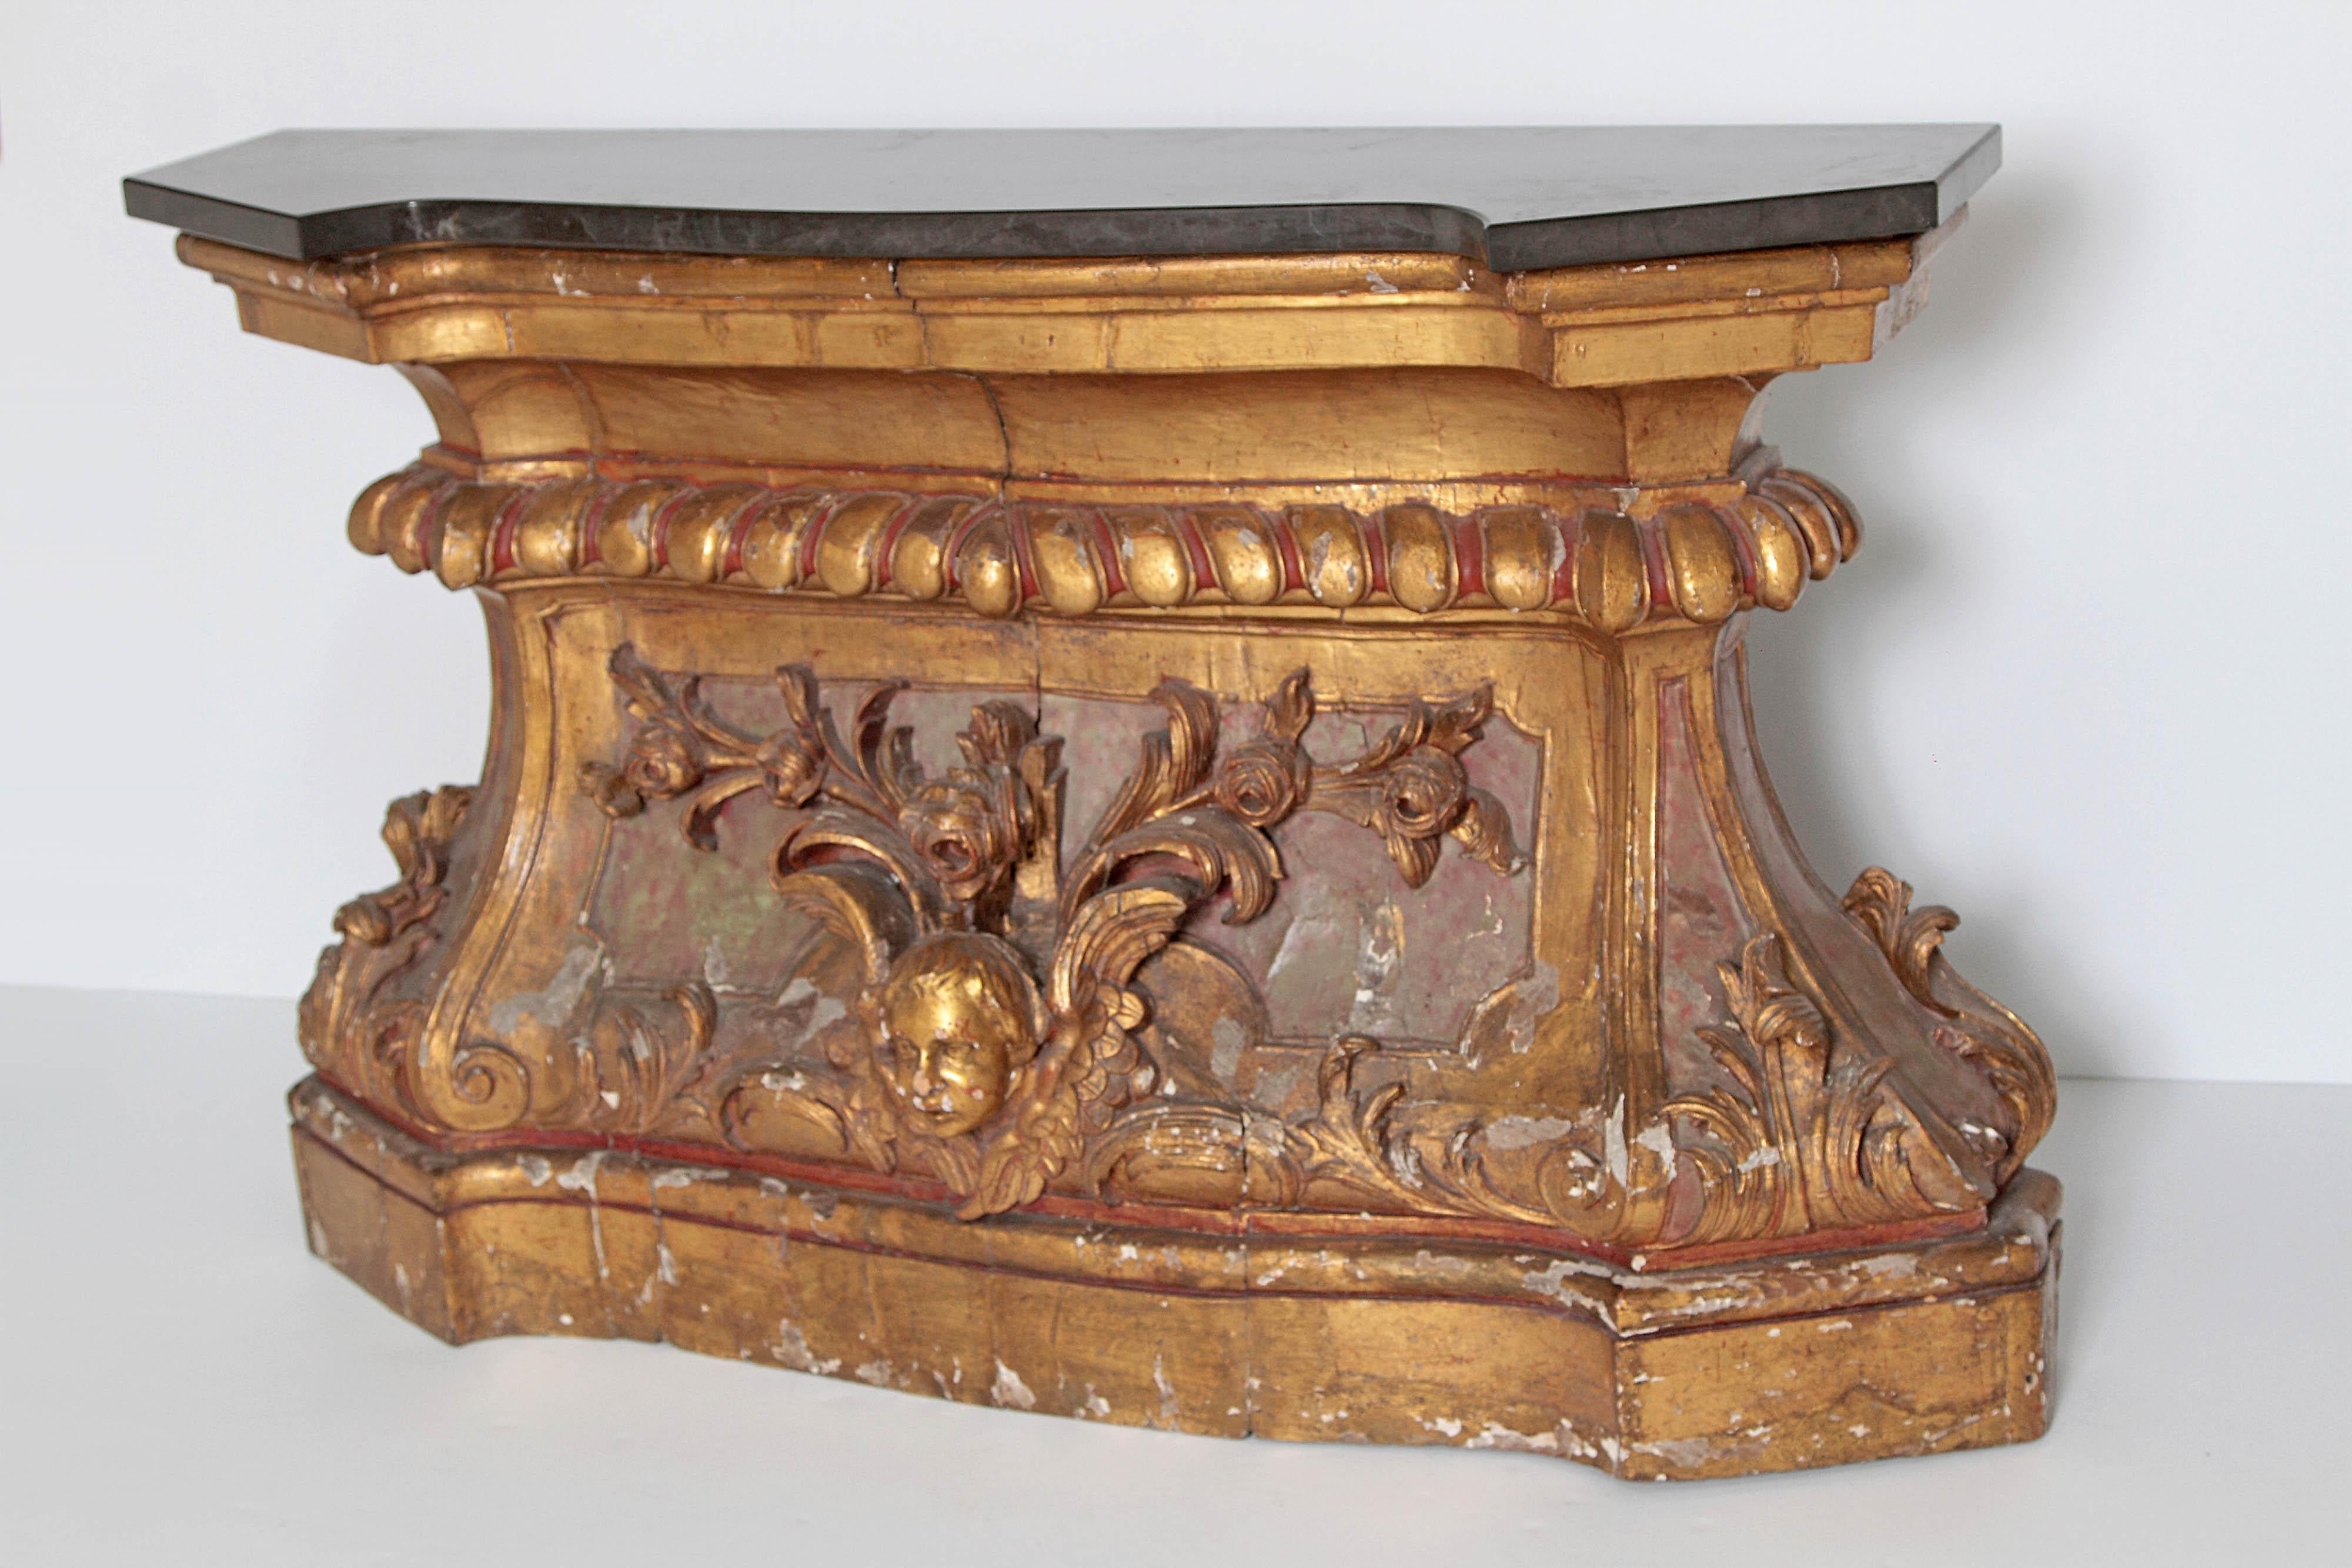 Baroque Mid-18th Century Italian Architectural Fragment / Console Table